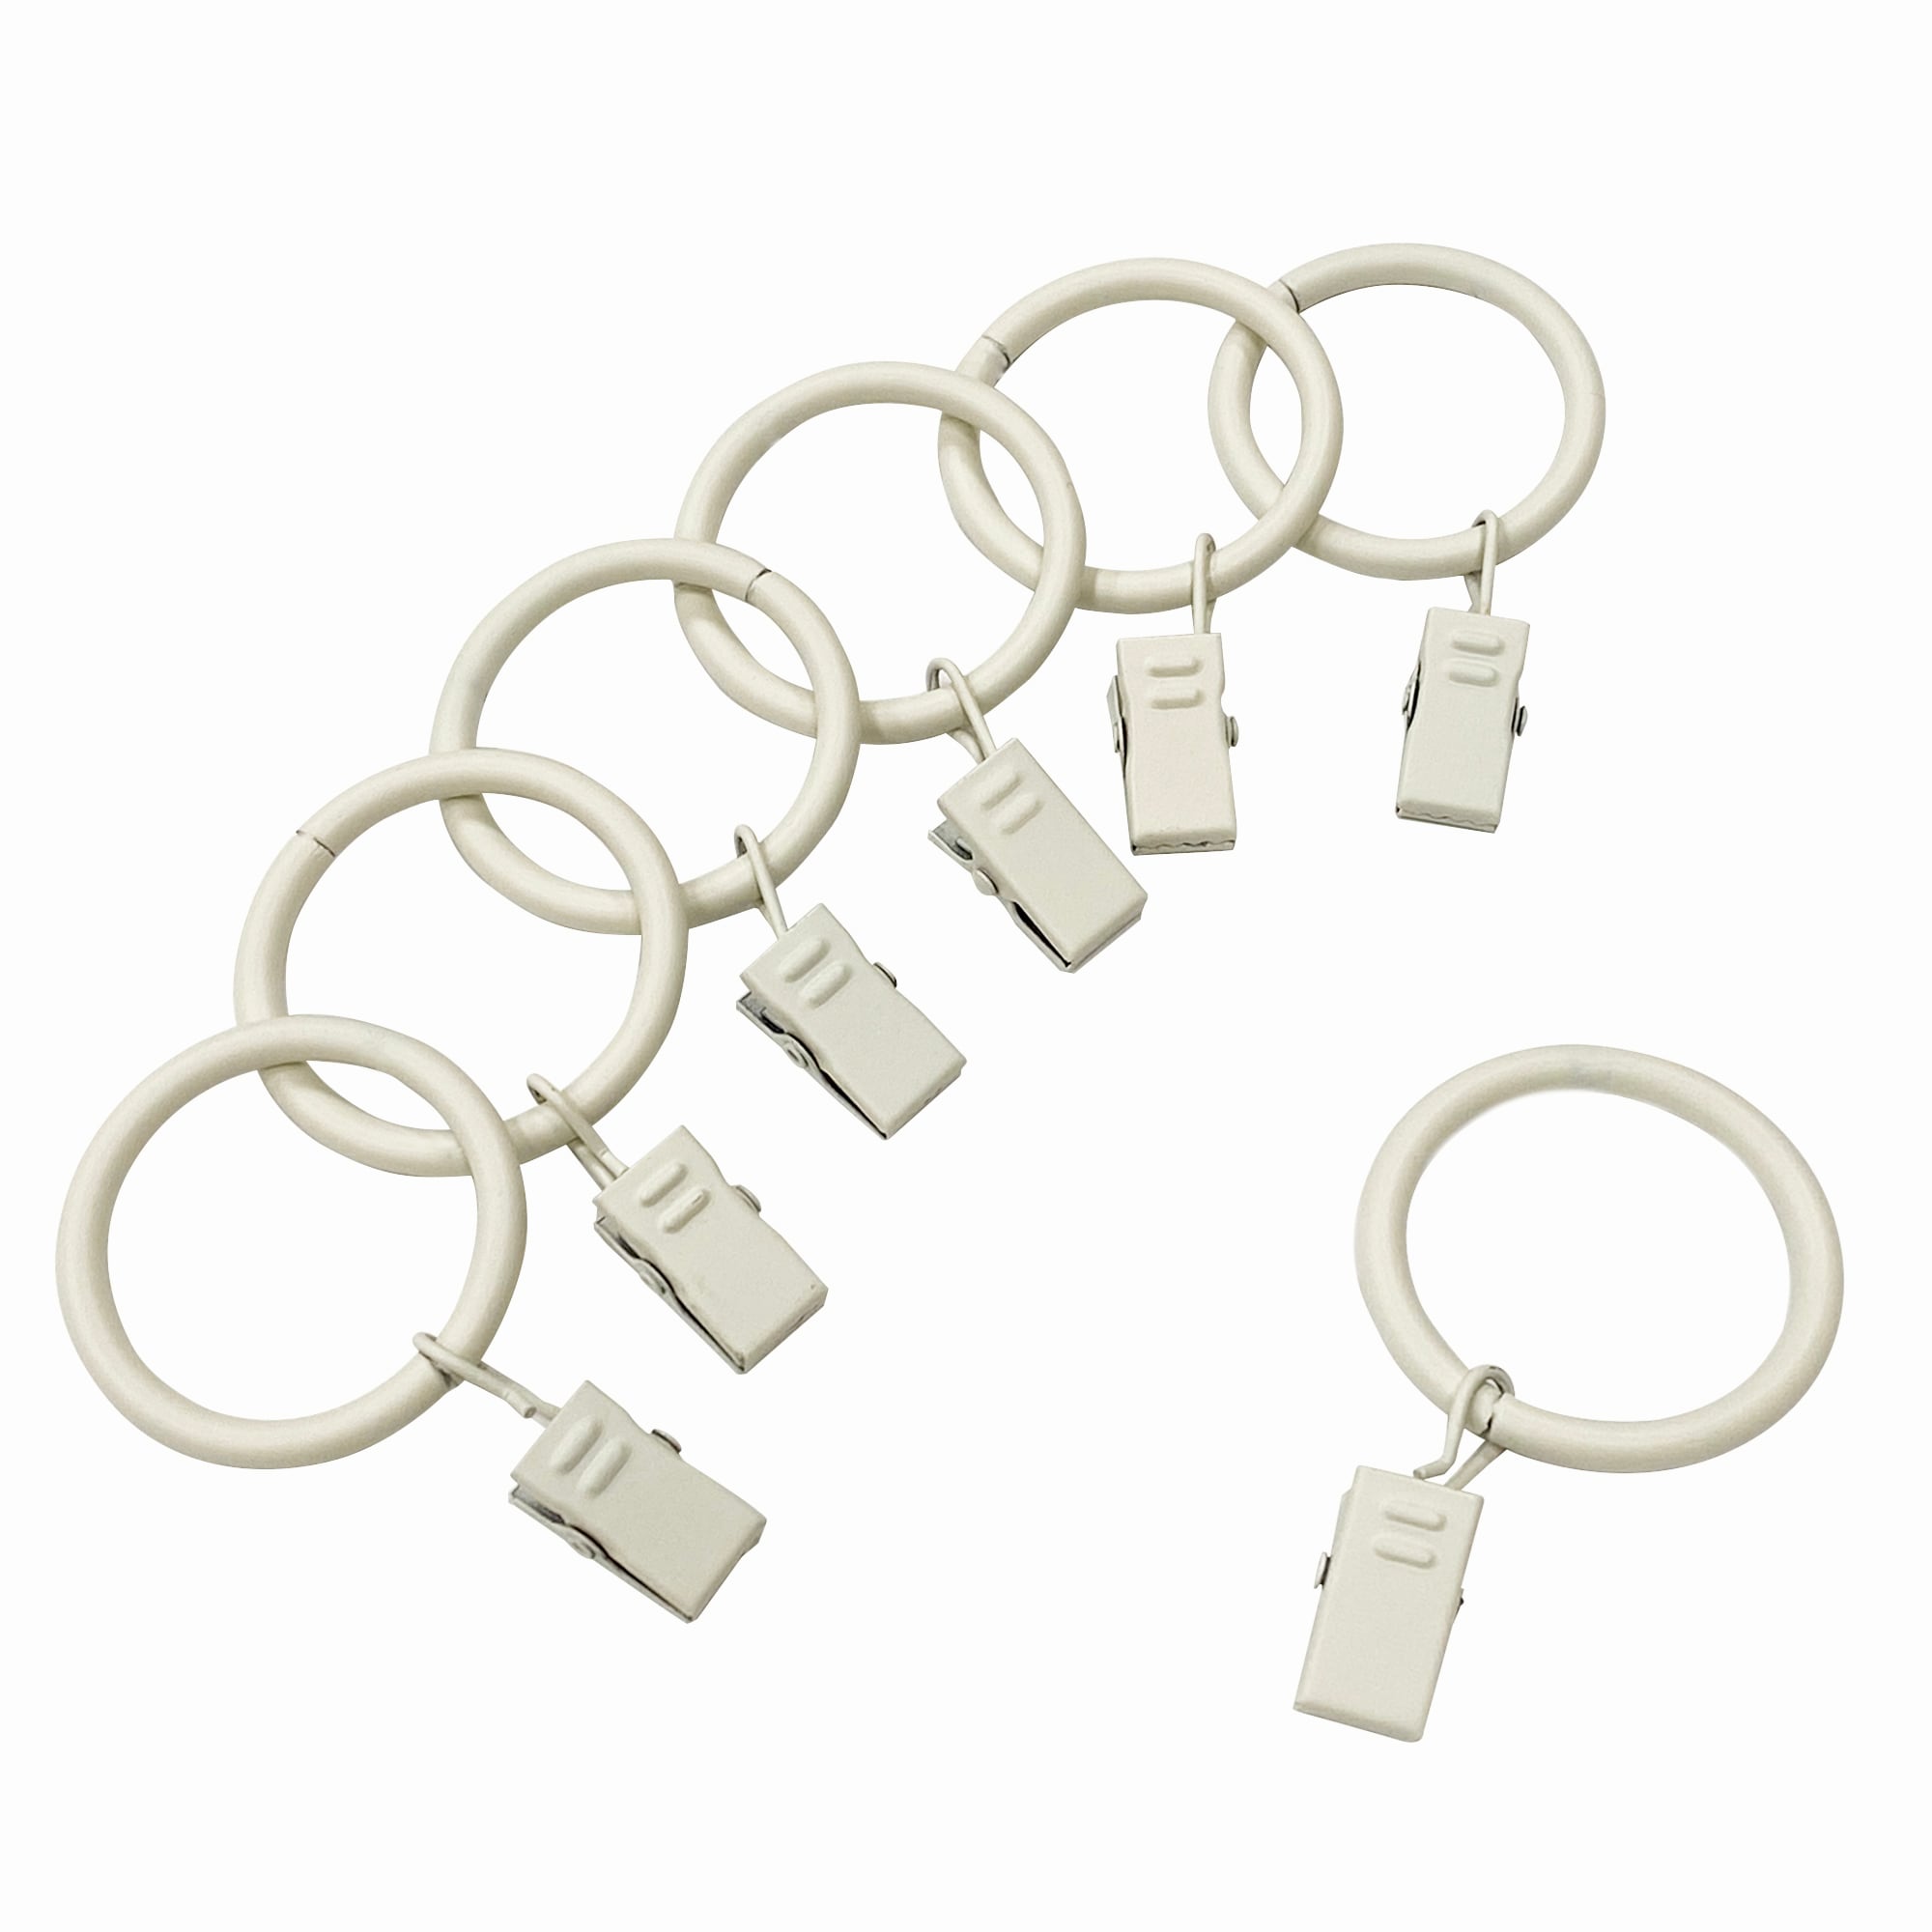 Lumi Wood Curtain Rod Clip Rings for 1-3/8 in. Pole, Set of 7 (White)